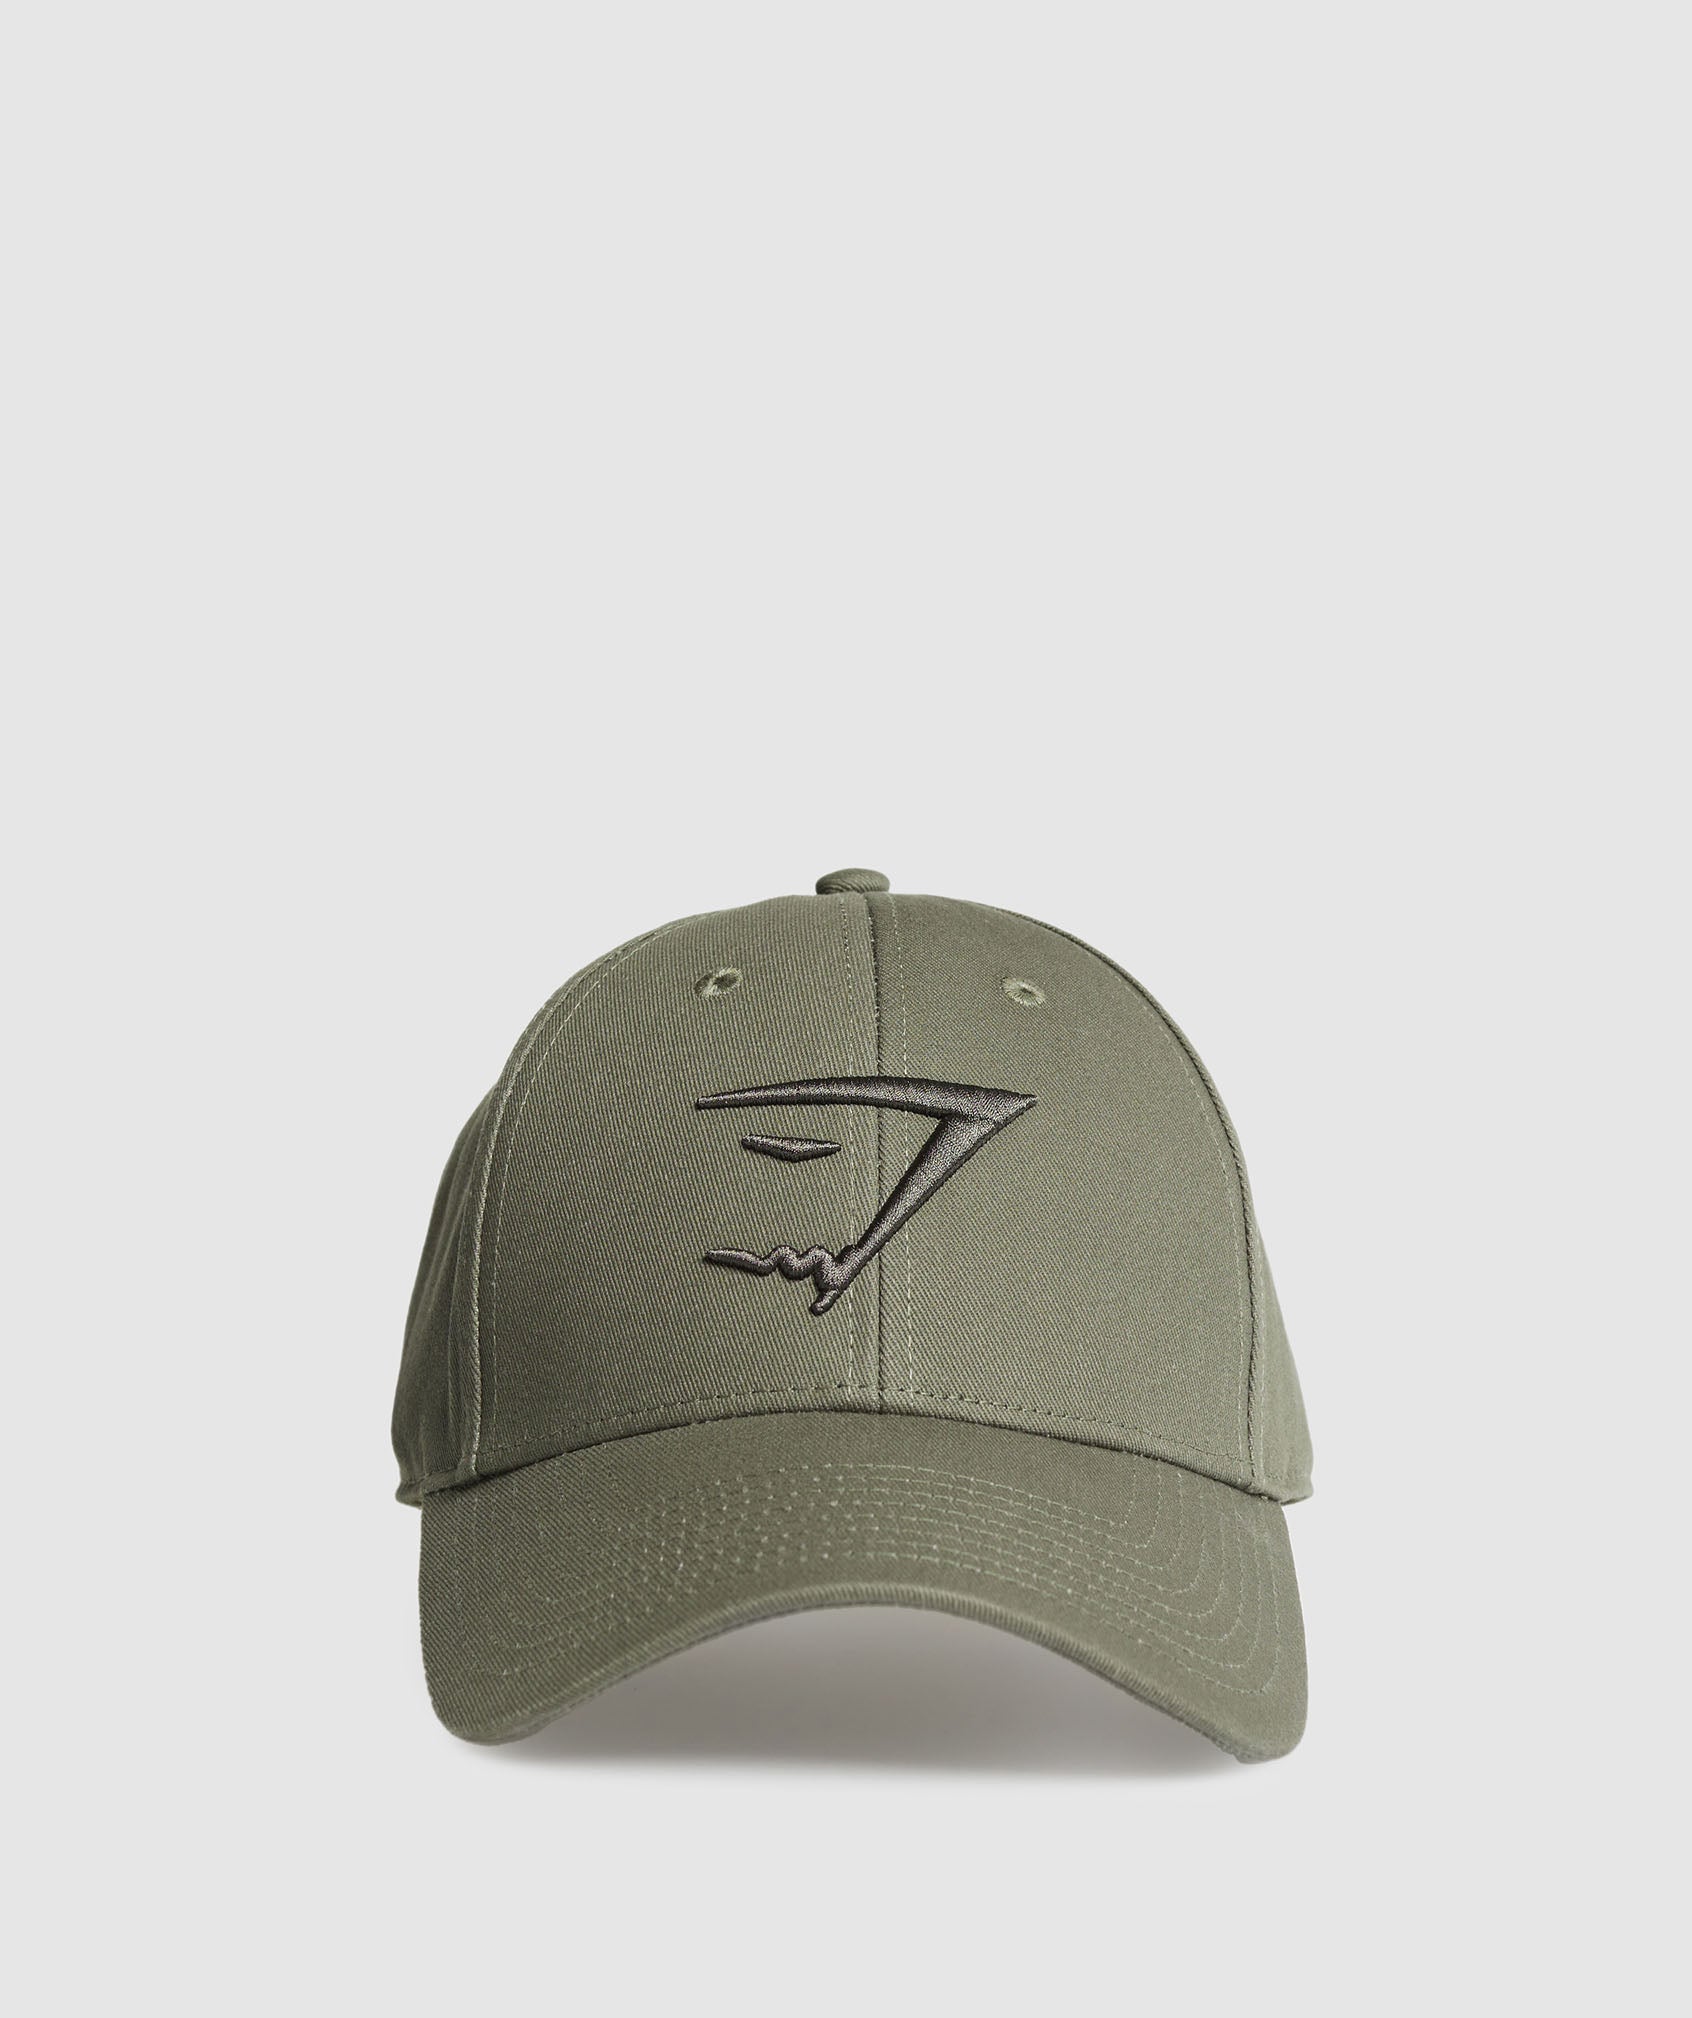 Sharkhead Cap in {{variantColor} is out of stock